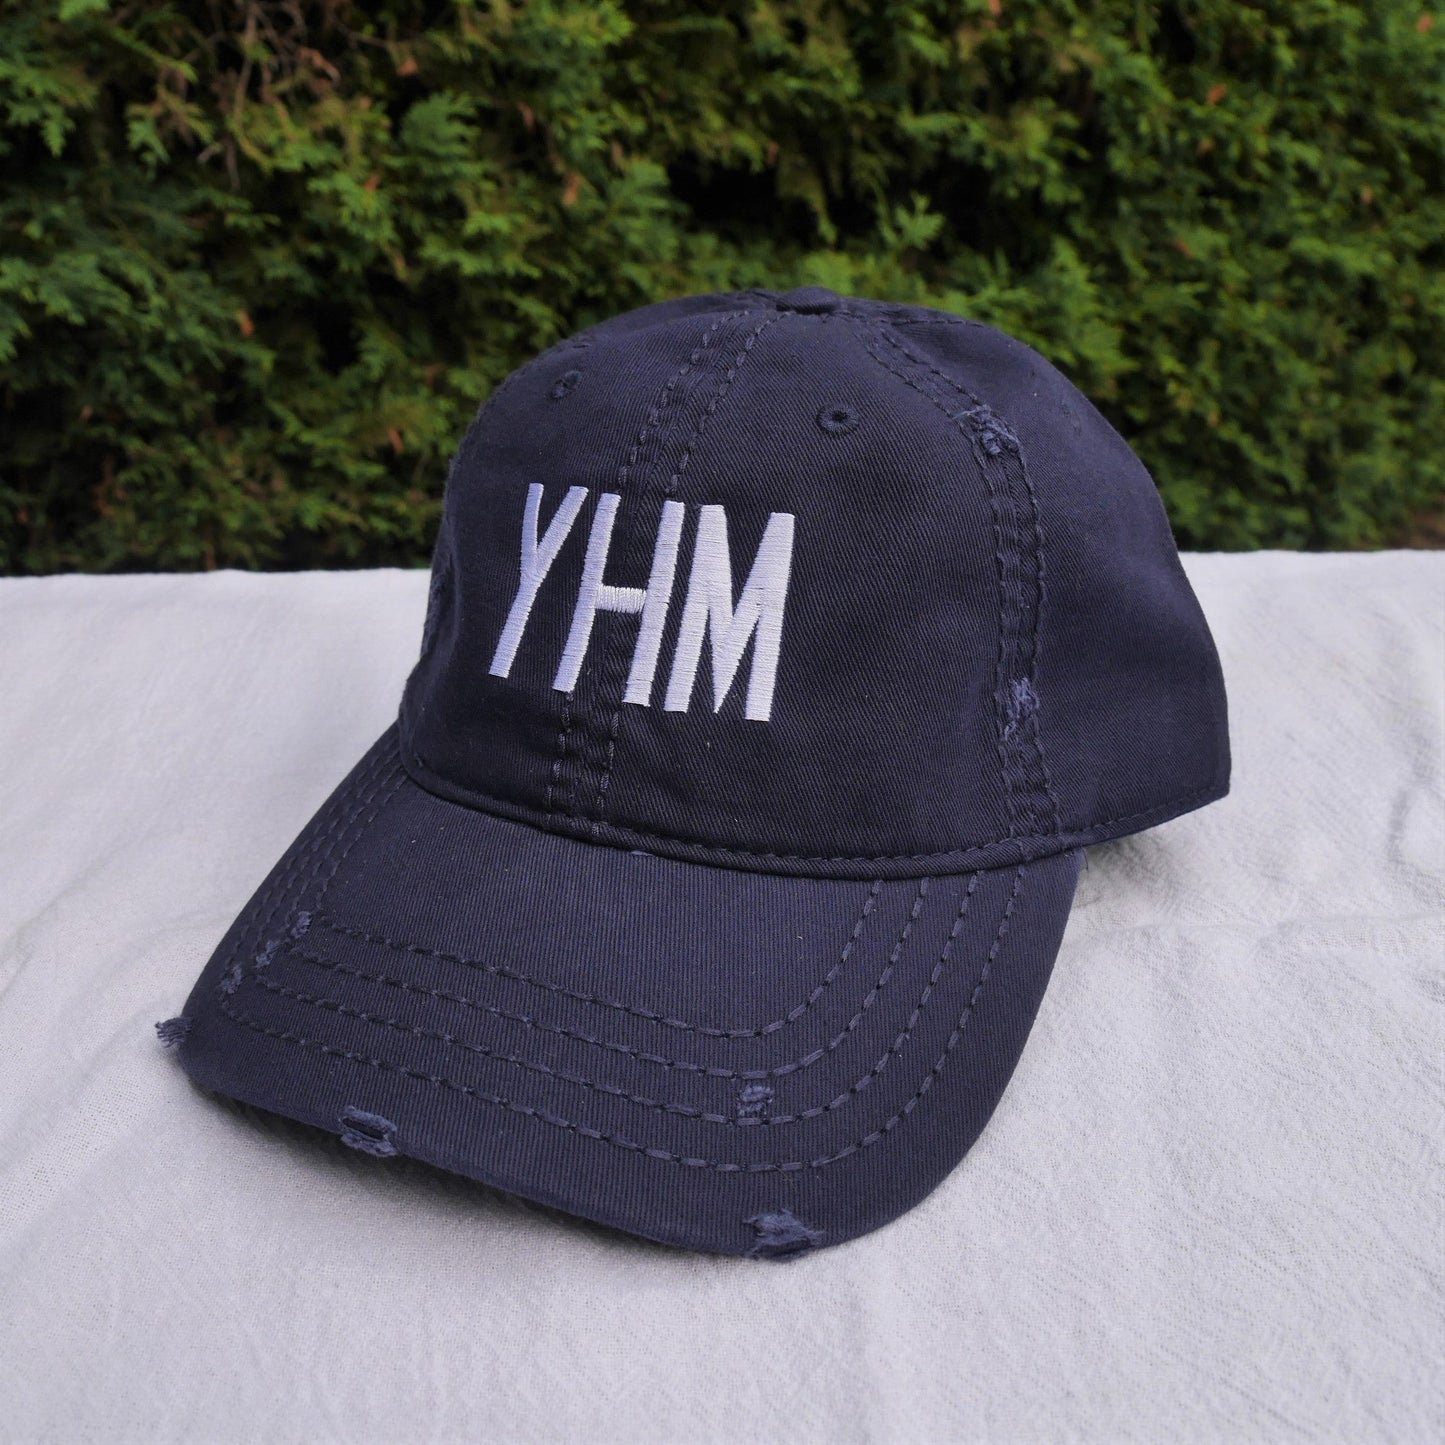 Airport Code Distressed Hat - White • YYT St. John's • YHM Designs - Image 21